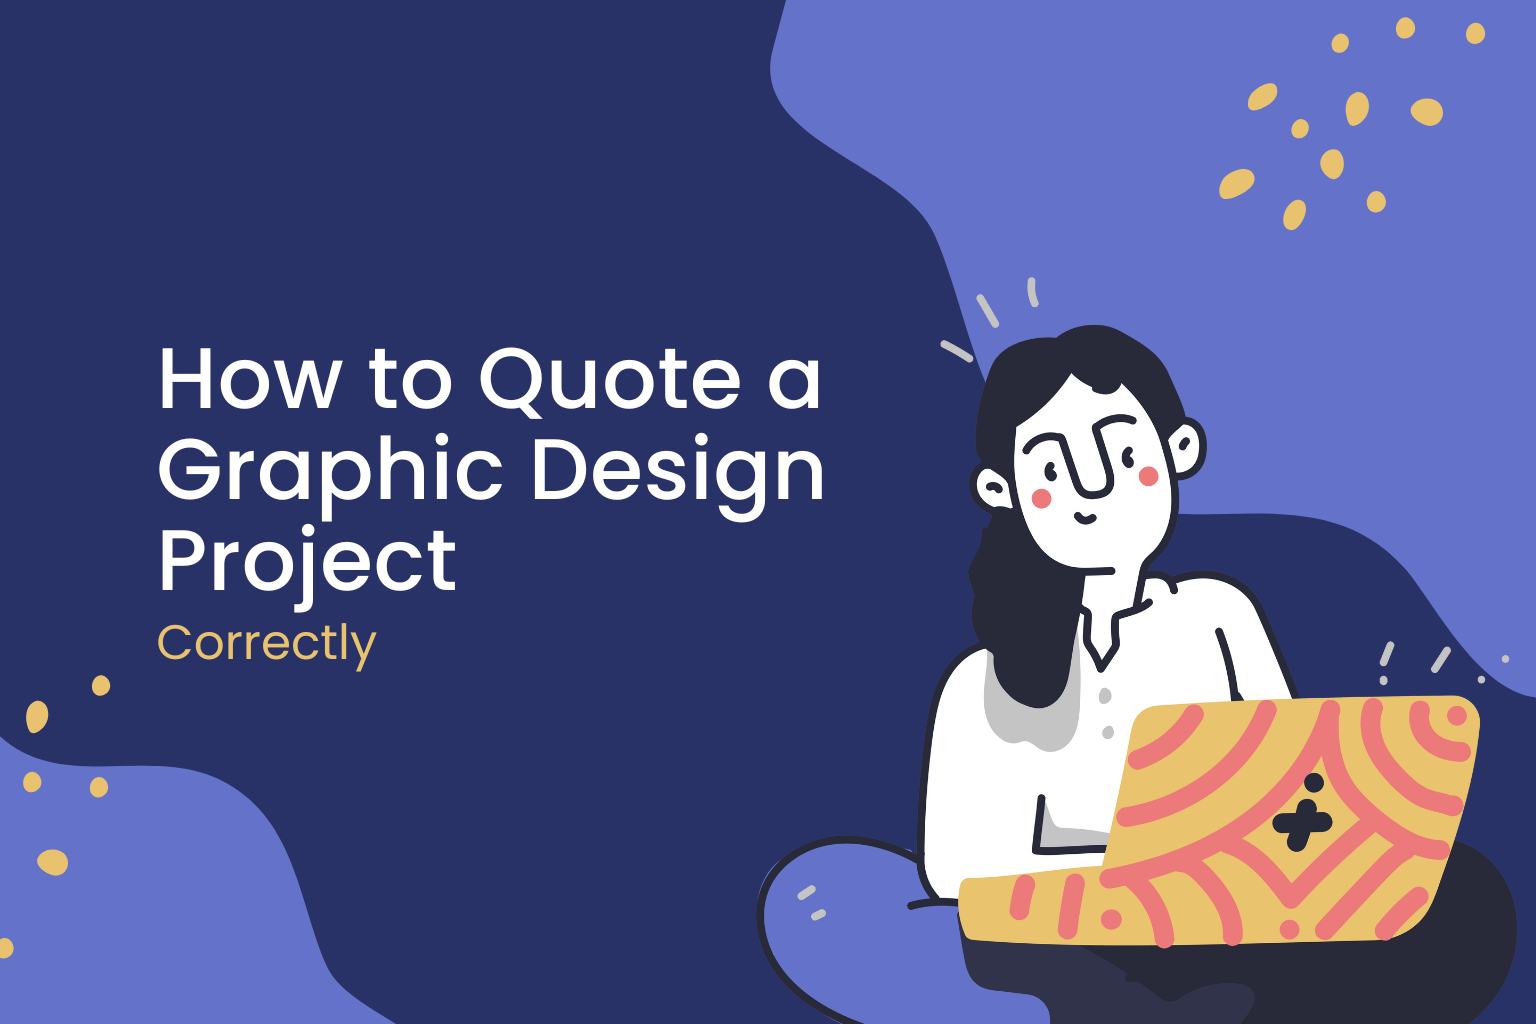 How to Quote a Graphic Design Project Correctly